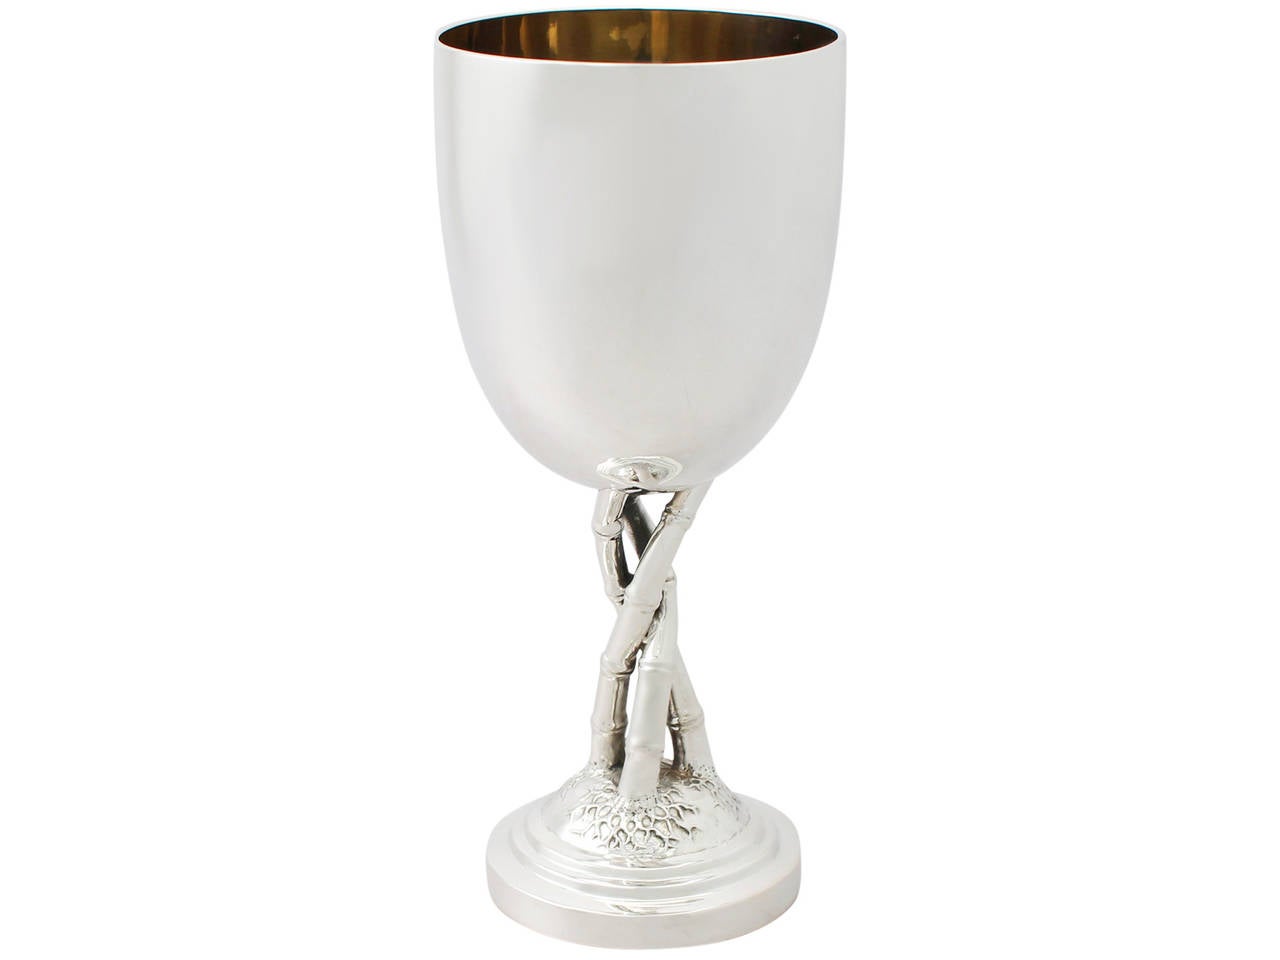 A fine and impressive antique Chinese export silver goblet, an addition to our wine and drinks related silverware collection.

This fine antique Chinese Export silver (CES) goblet has a circular bell shaped form a shaped stem and plain circular